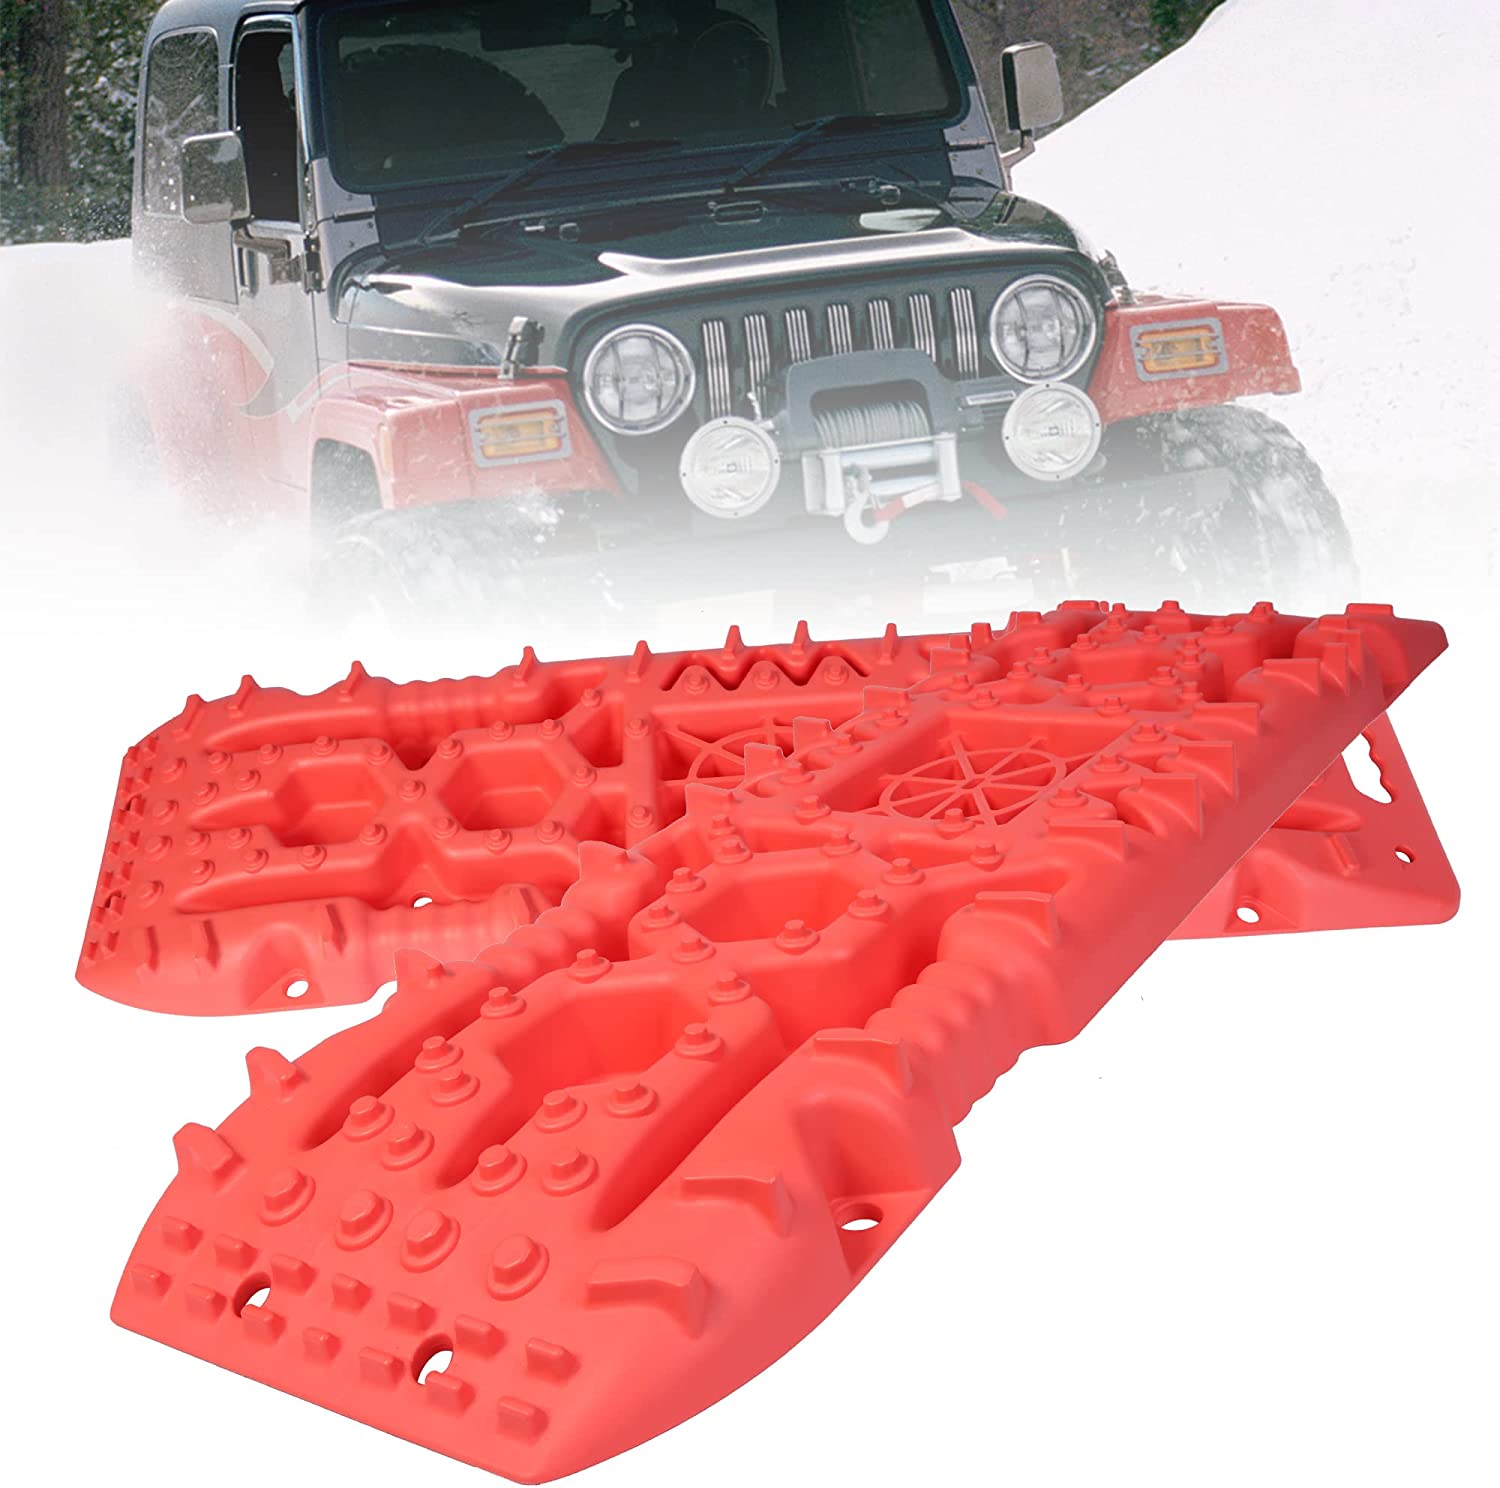 (Out of Stock) 2 Pack Traction Boards with Jack Lift Base,Recovery Track Traction Mat for 4WD SUV, Jeep Tire Traction Tool Suitable for Mud, Sand, Snow, Ice Red